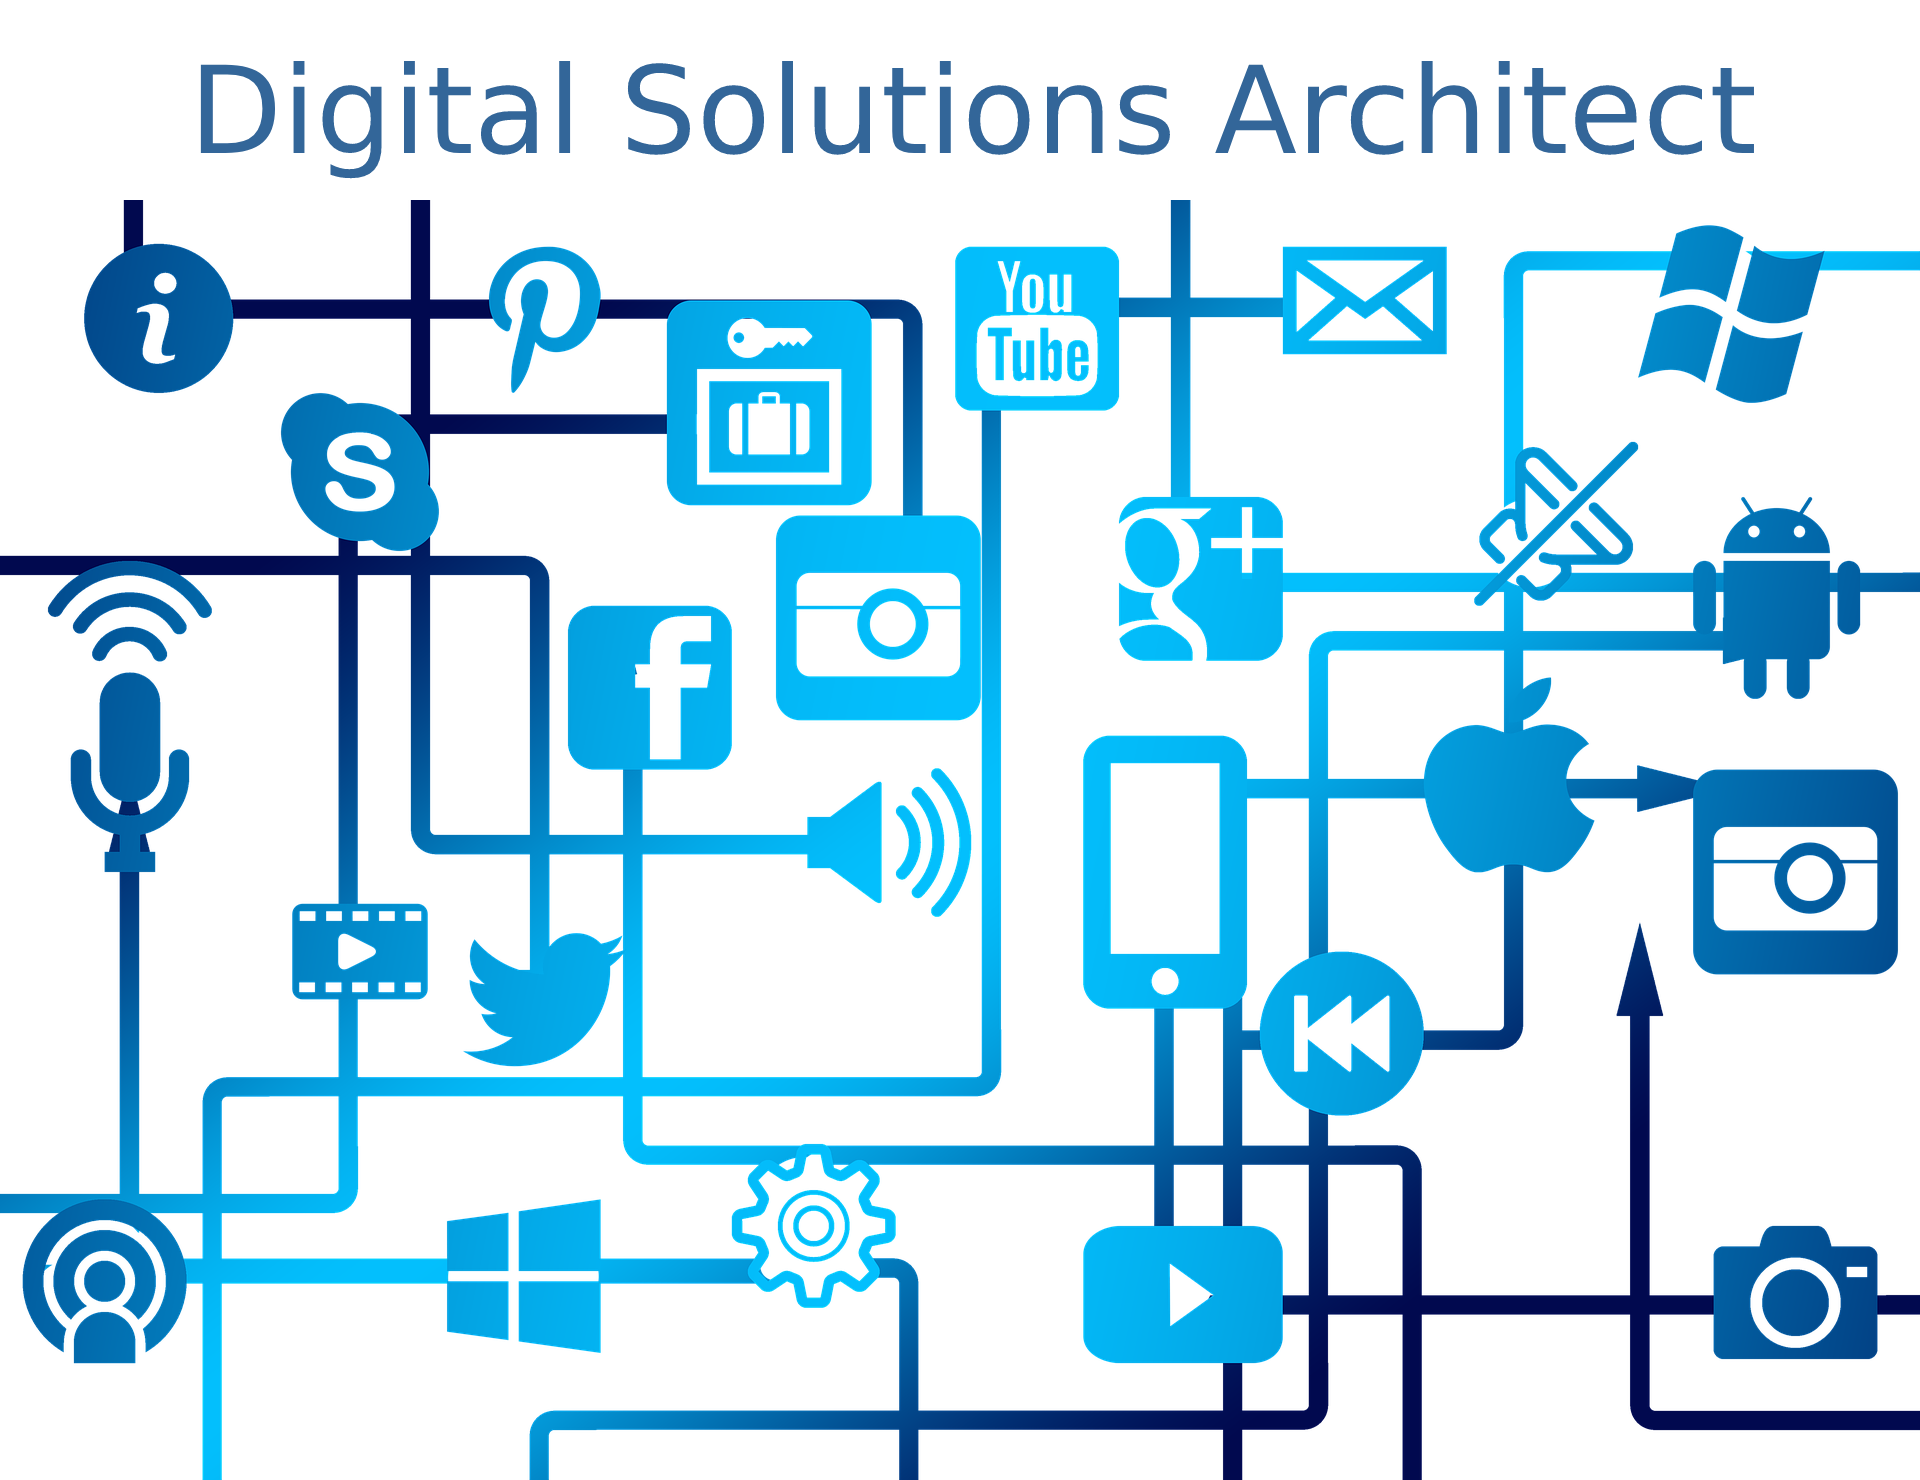 Digital Solutions Architect - Tampa Bay